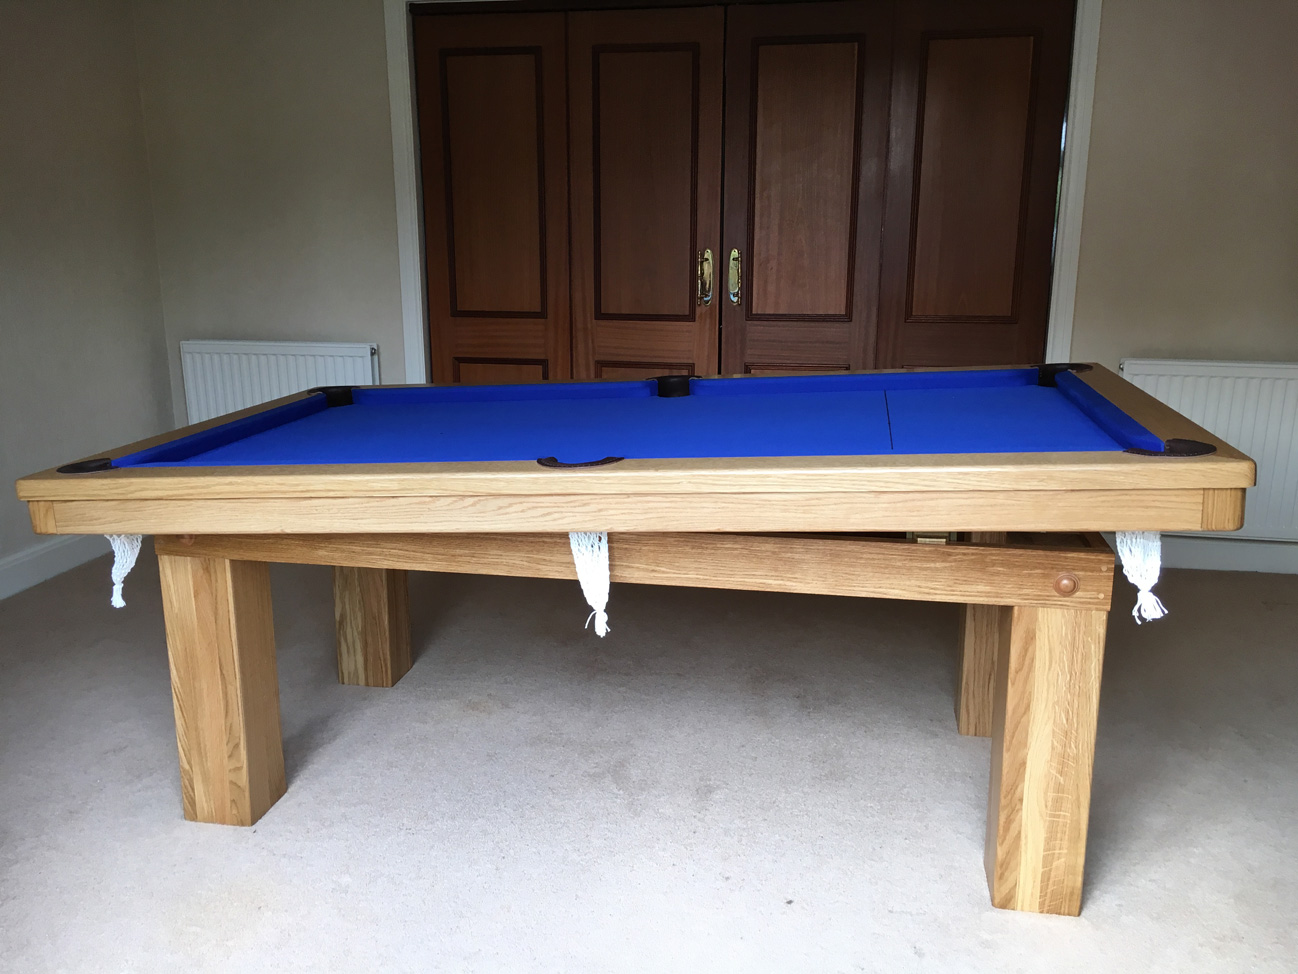 Modern 7ft Pool Dining Table in Oak & Blue - Pool Table Company